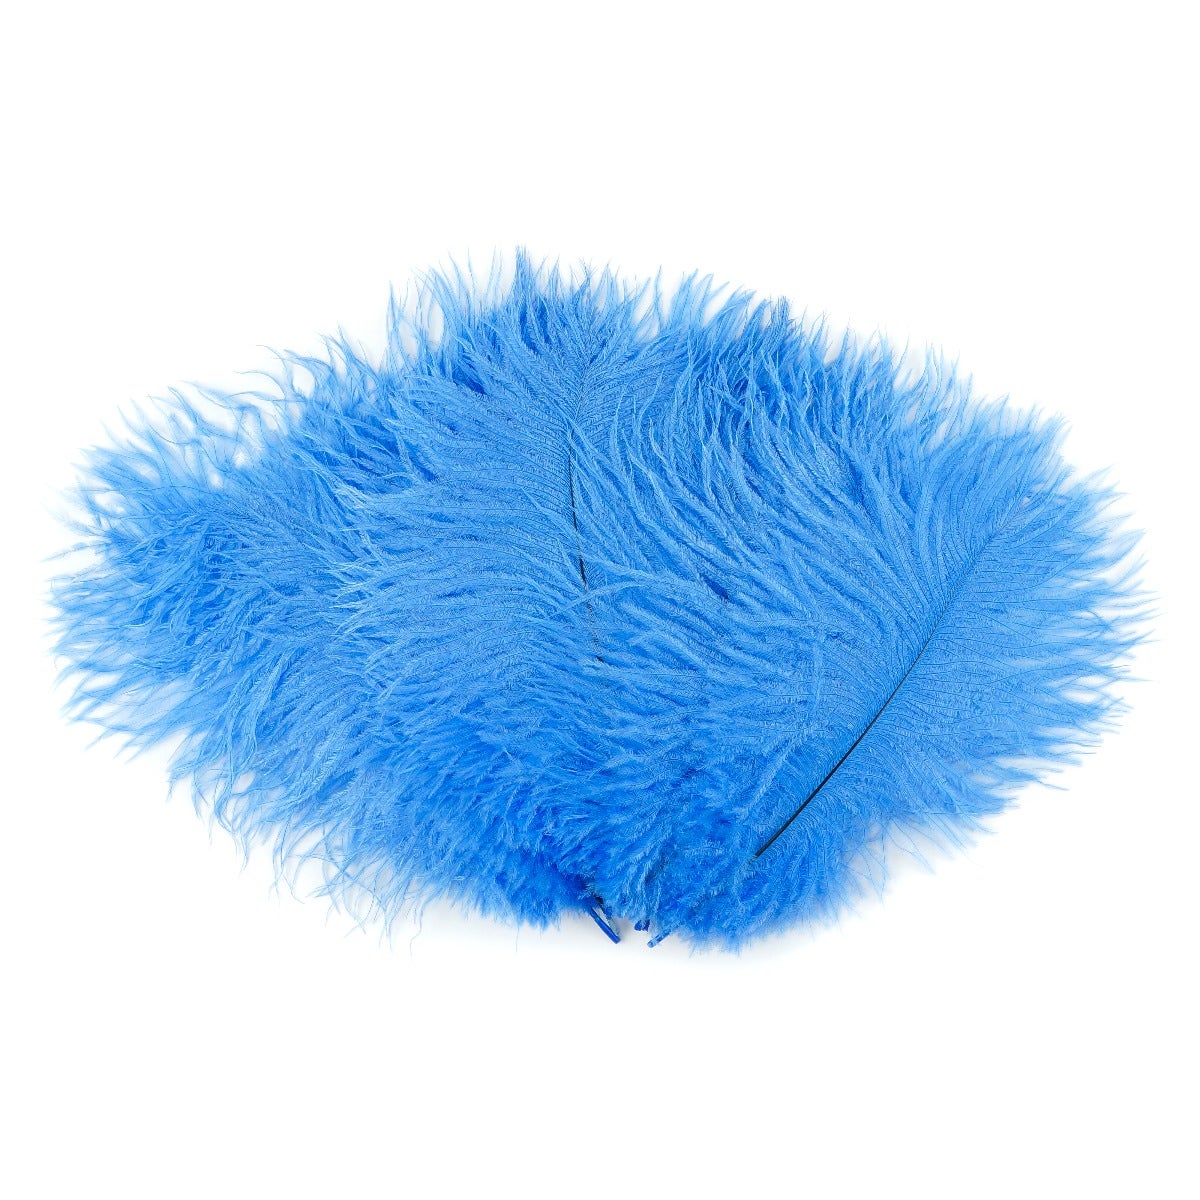 Ostrich Feathers 9-12" Drabs - Sky